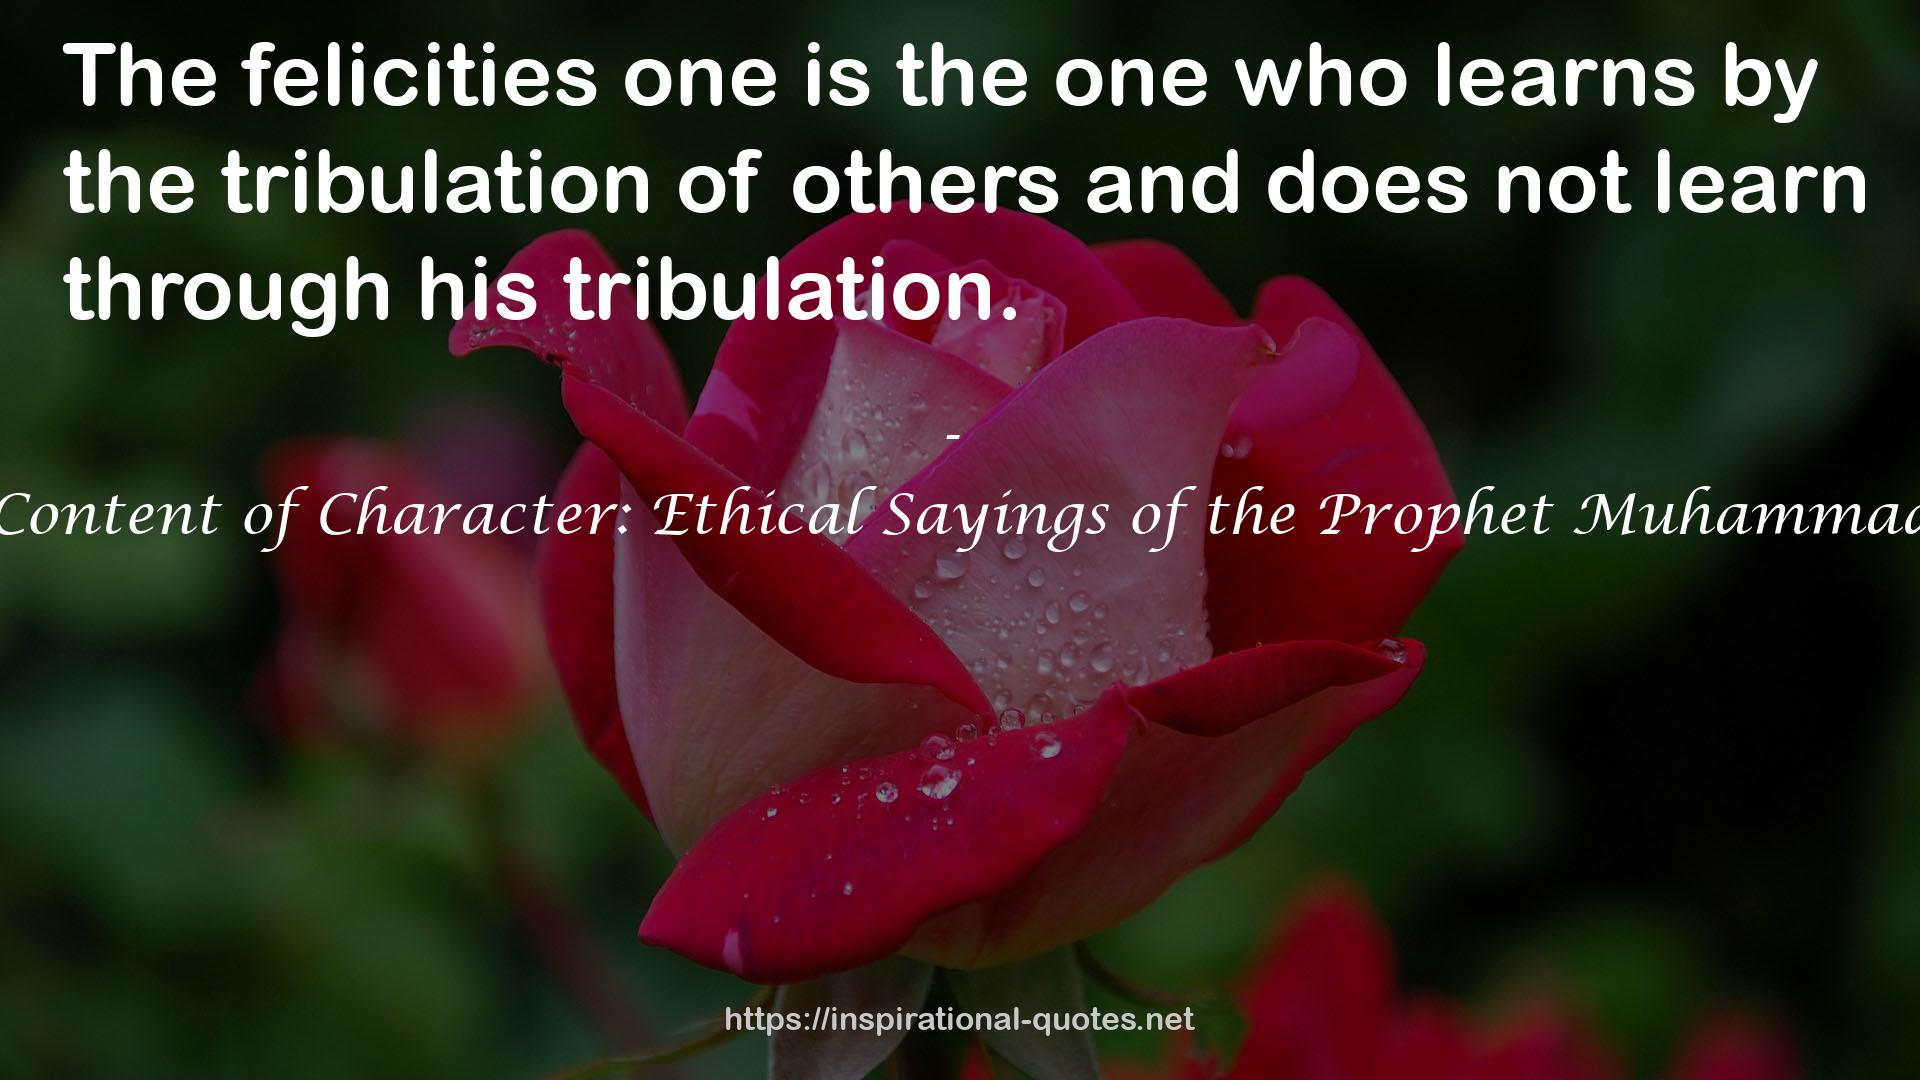 The Content of Character: Ethical Sayings of the Prophet Muhammad (sa) QUOTES